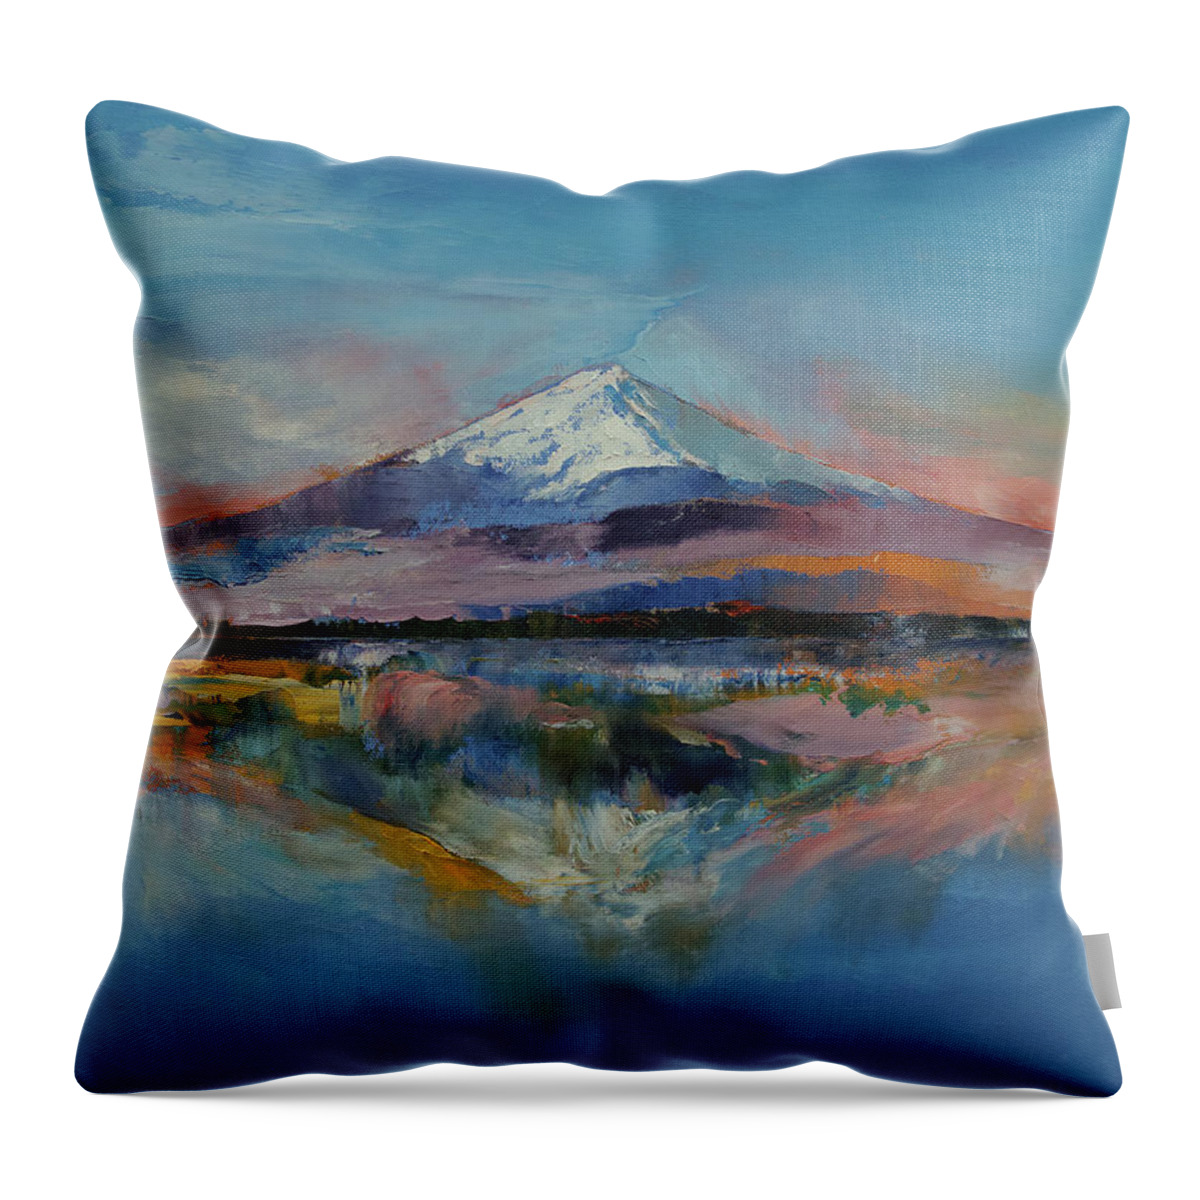 Mount Fuji Throw Pillow featuring the painting Mount Fuji by Michael Creese